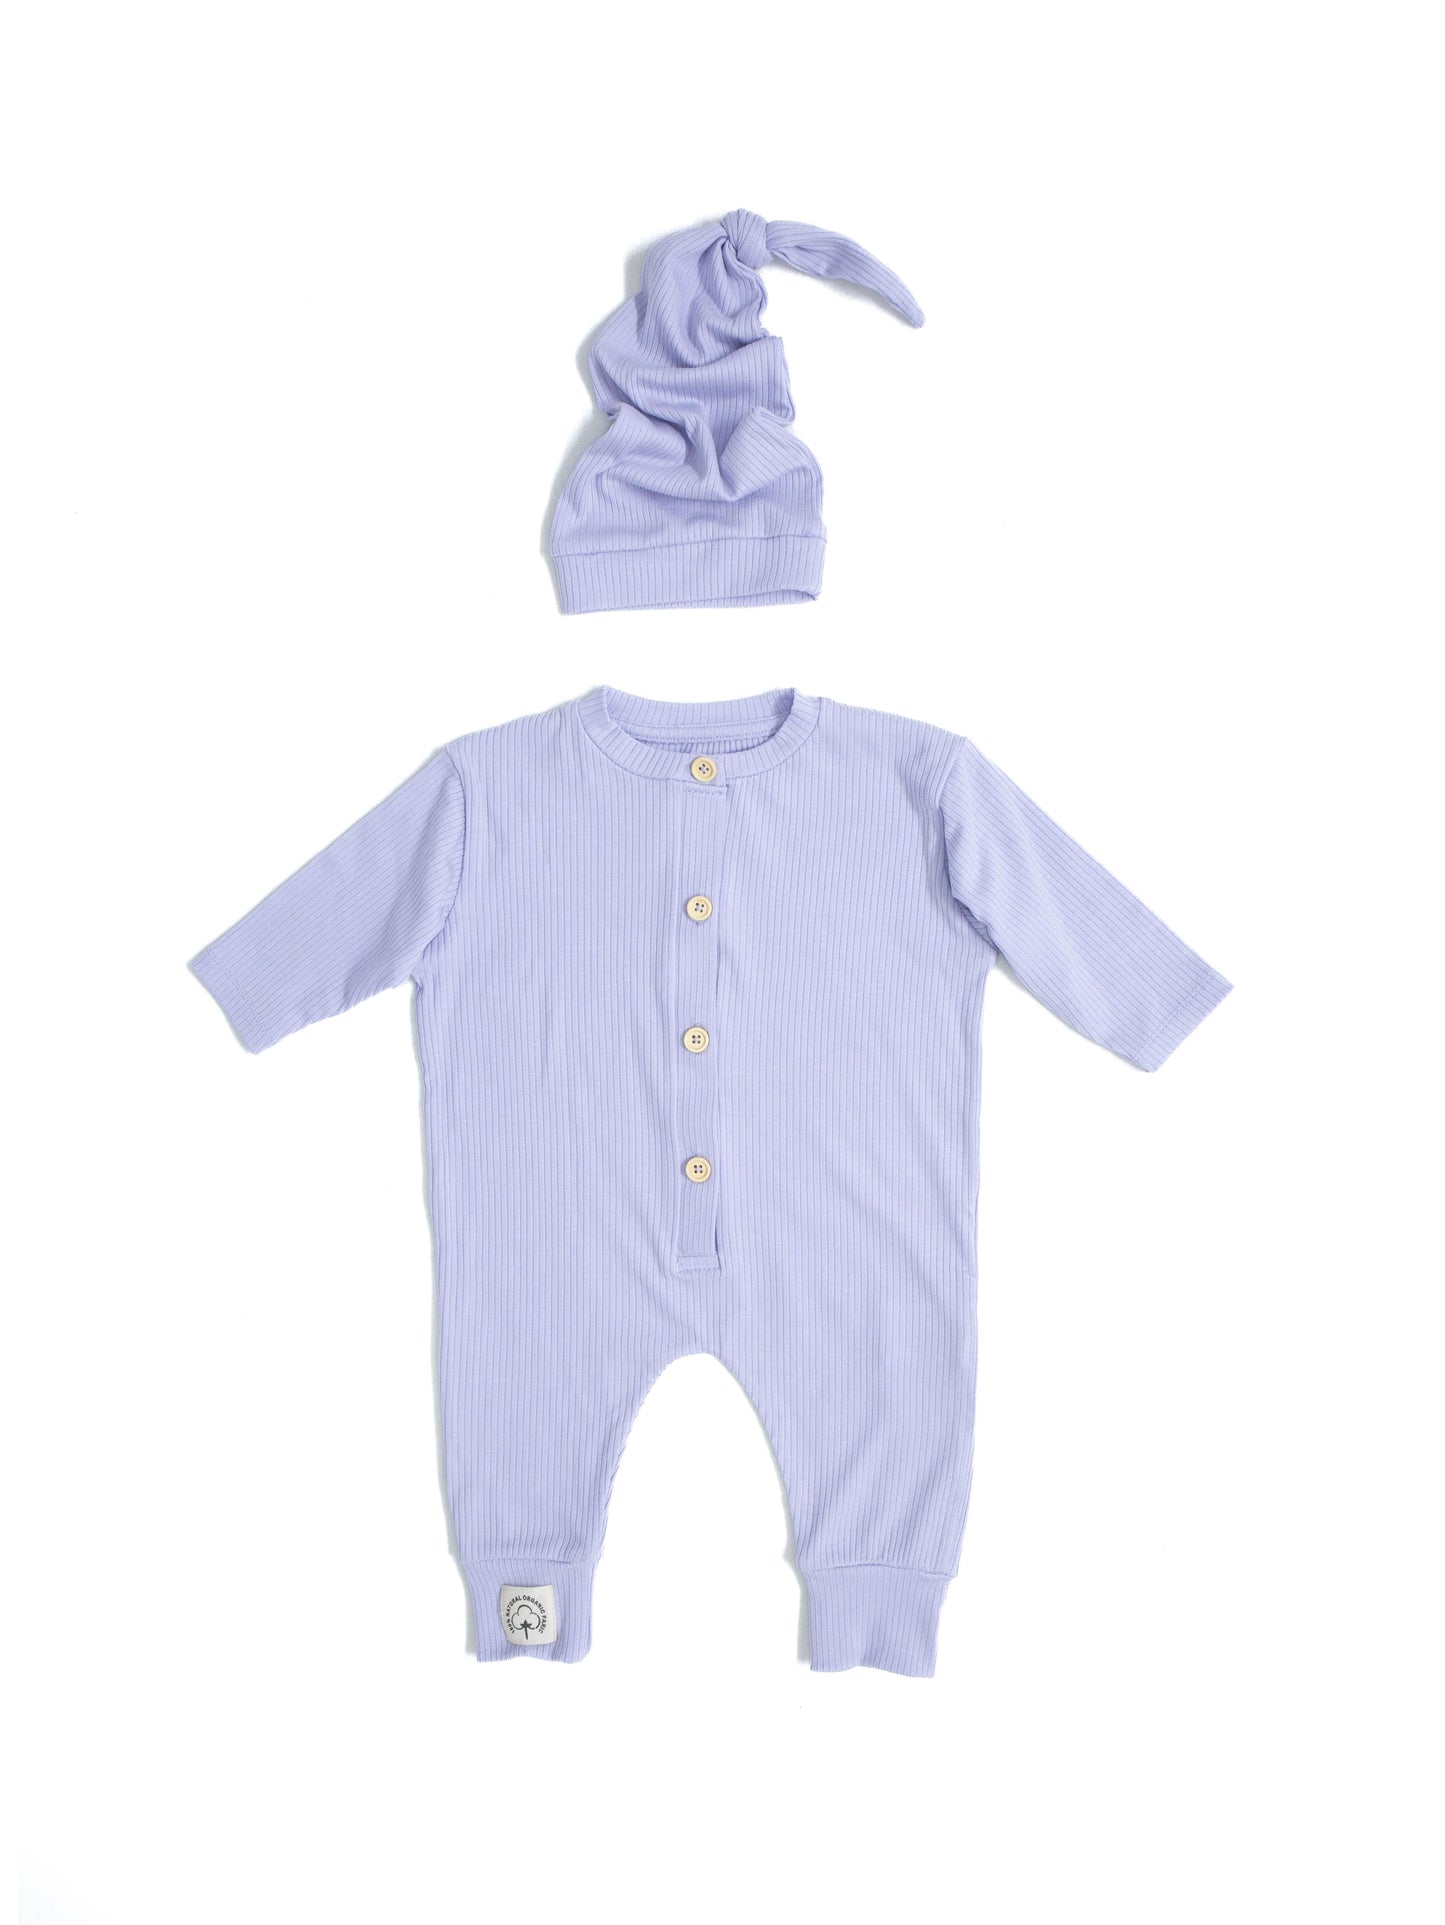 Unisex Baby 100% Lyocell Cotton Overalls and Beanie Set